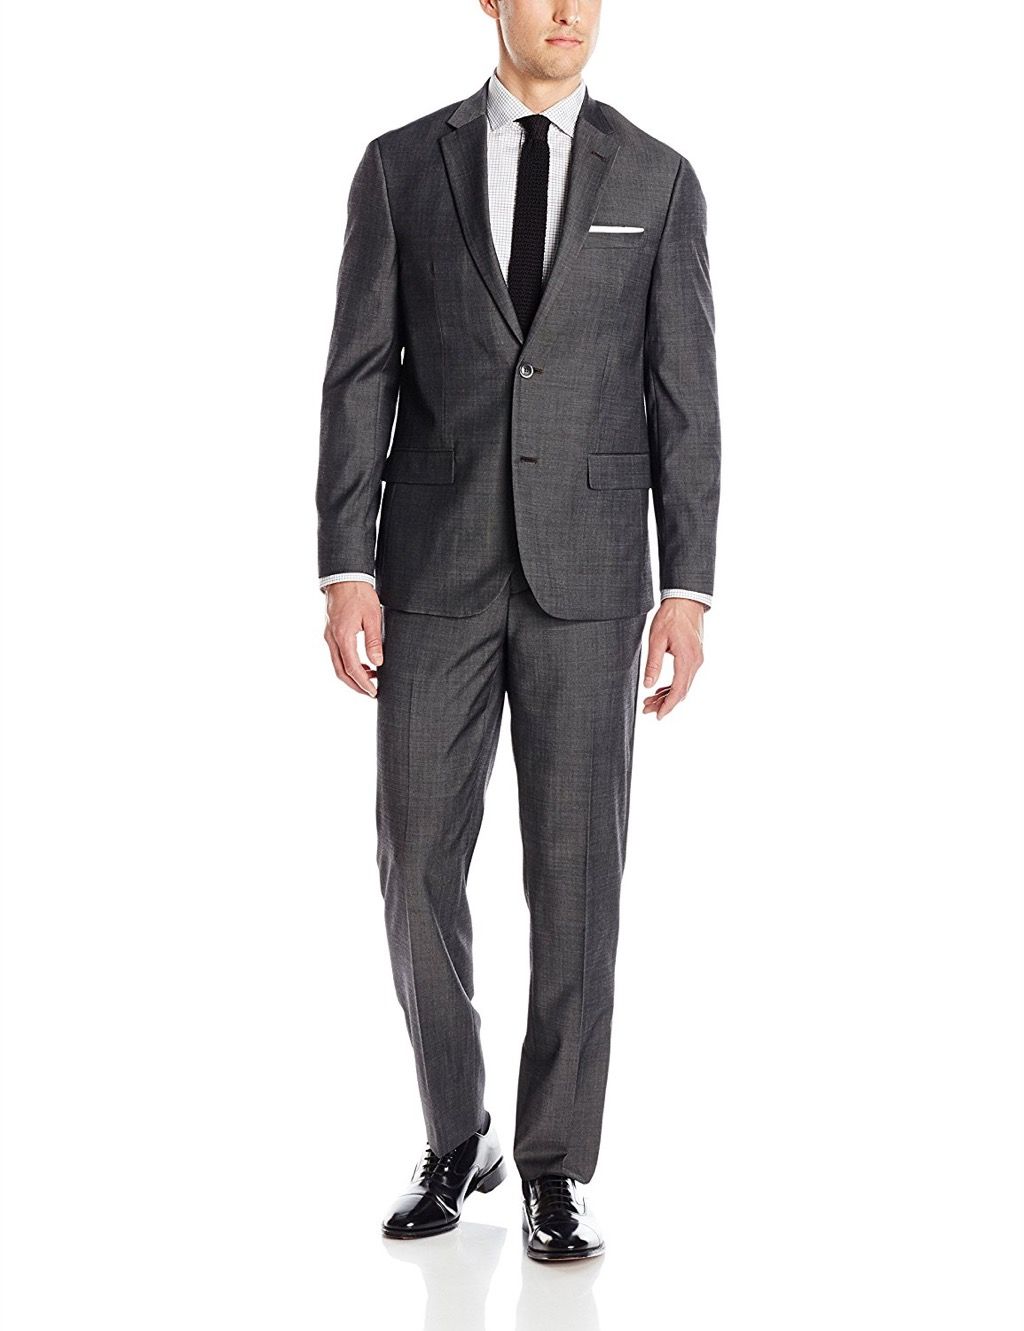 Suit ng Amazon